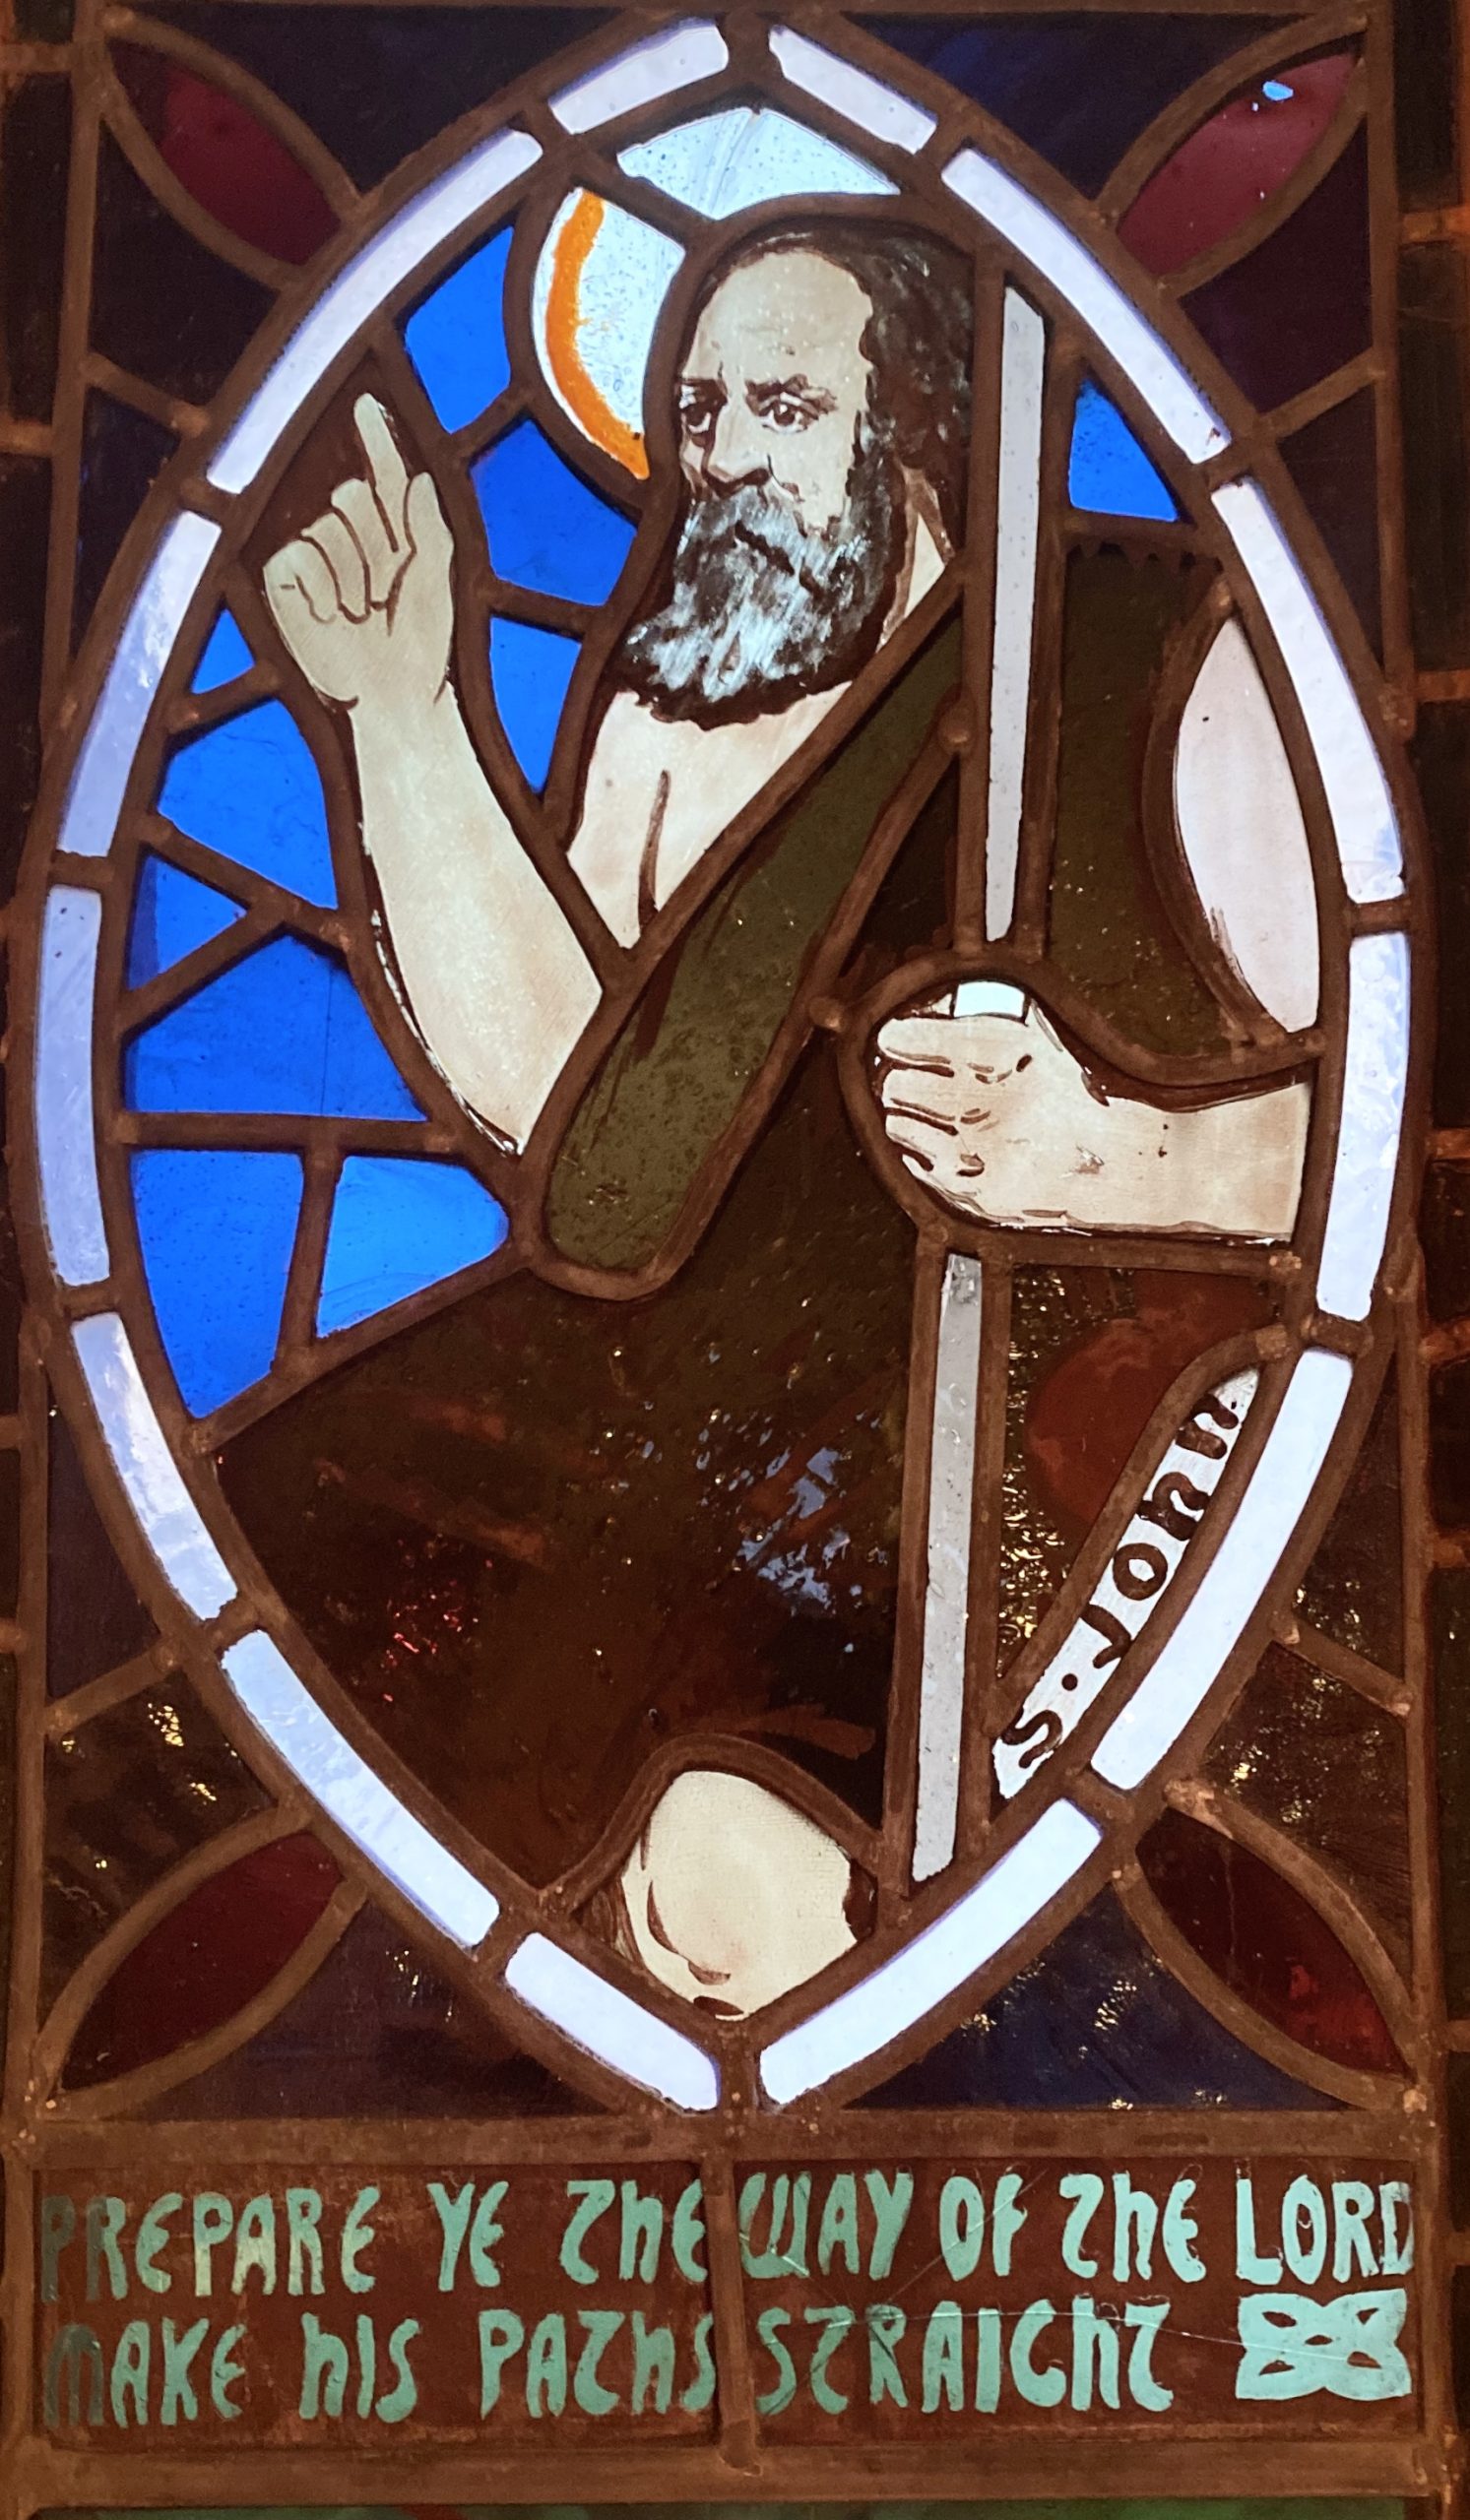 John the Baptist depicted in stained glass at Kiel Church